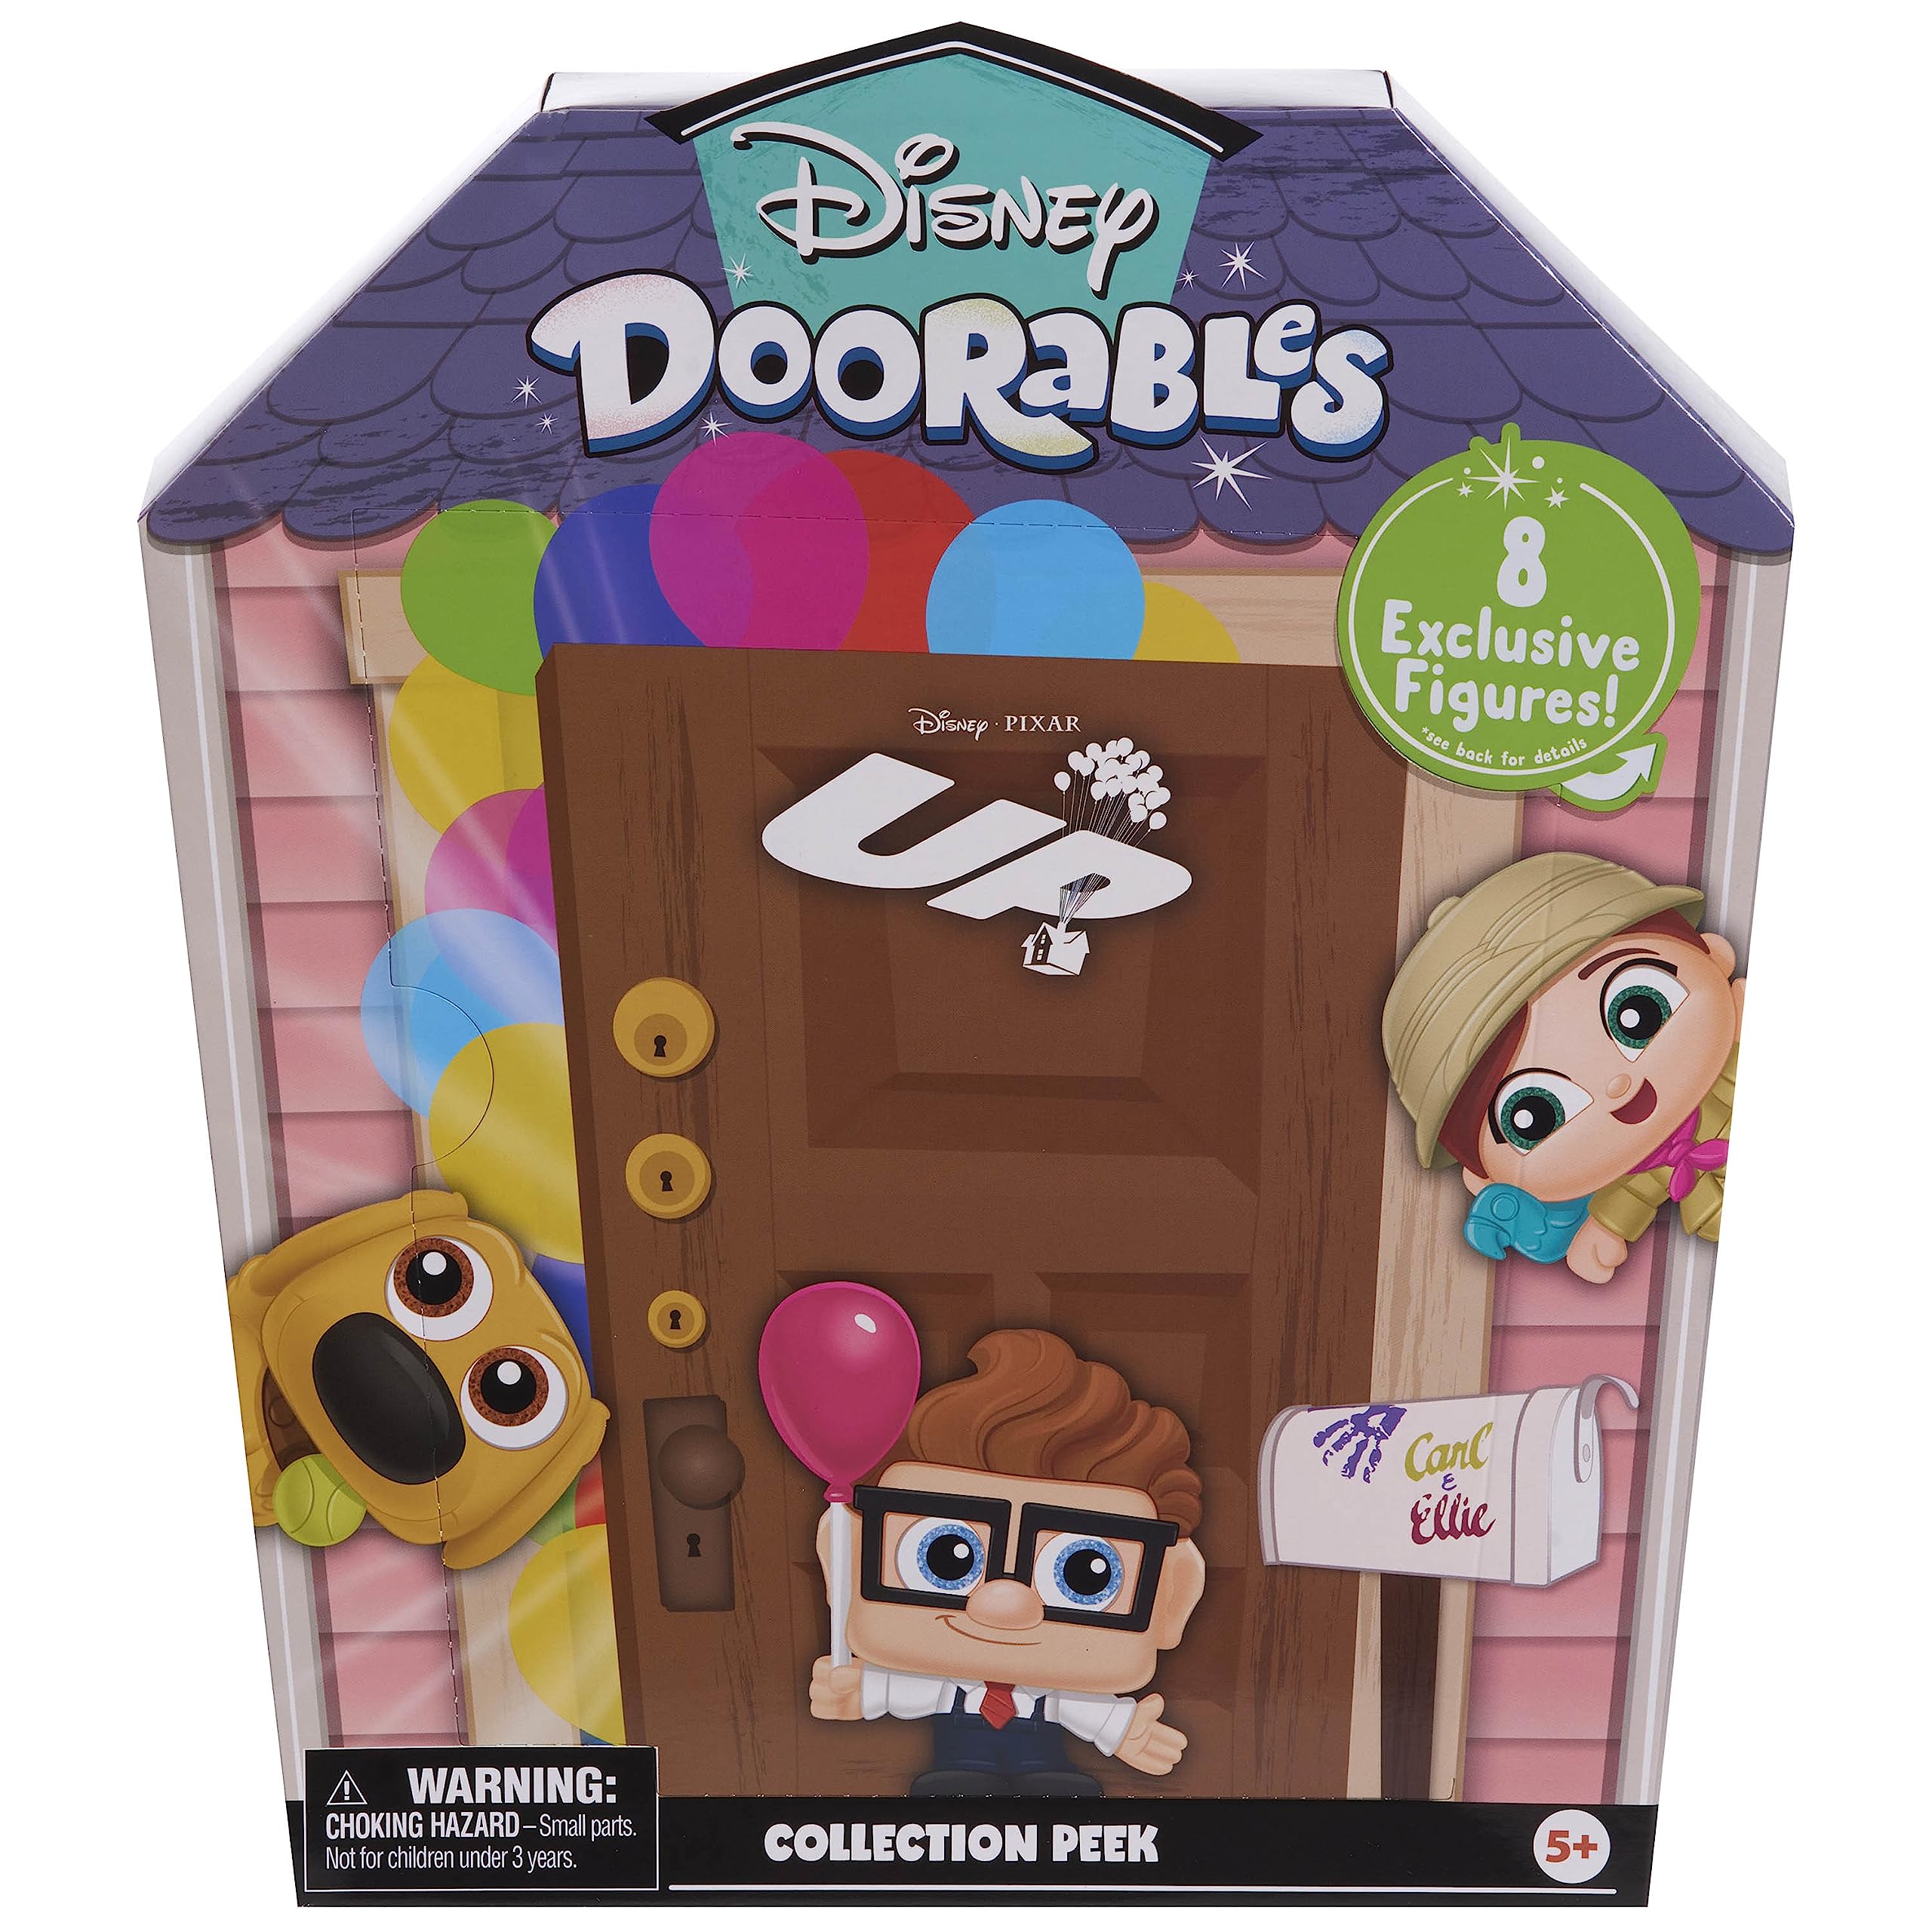 Disney Doorables New Up Collector Peek, Collectible Blind Bag Figures, Officially Licensed Kids Toys for Ages 5 Up, Gifts and Presents by Just Play